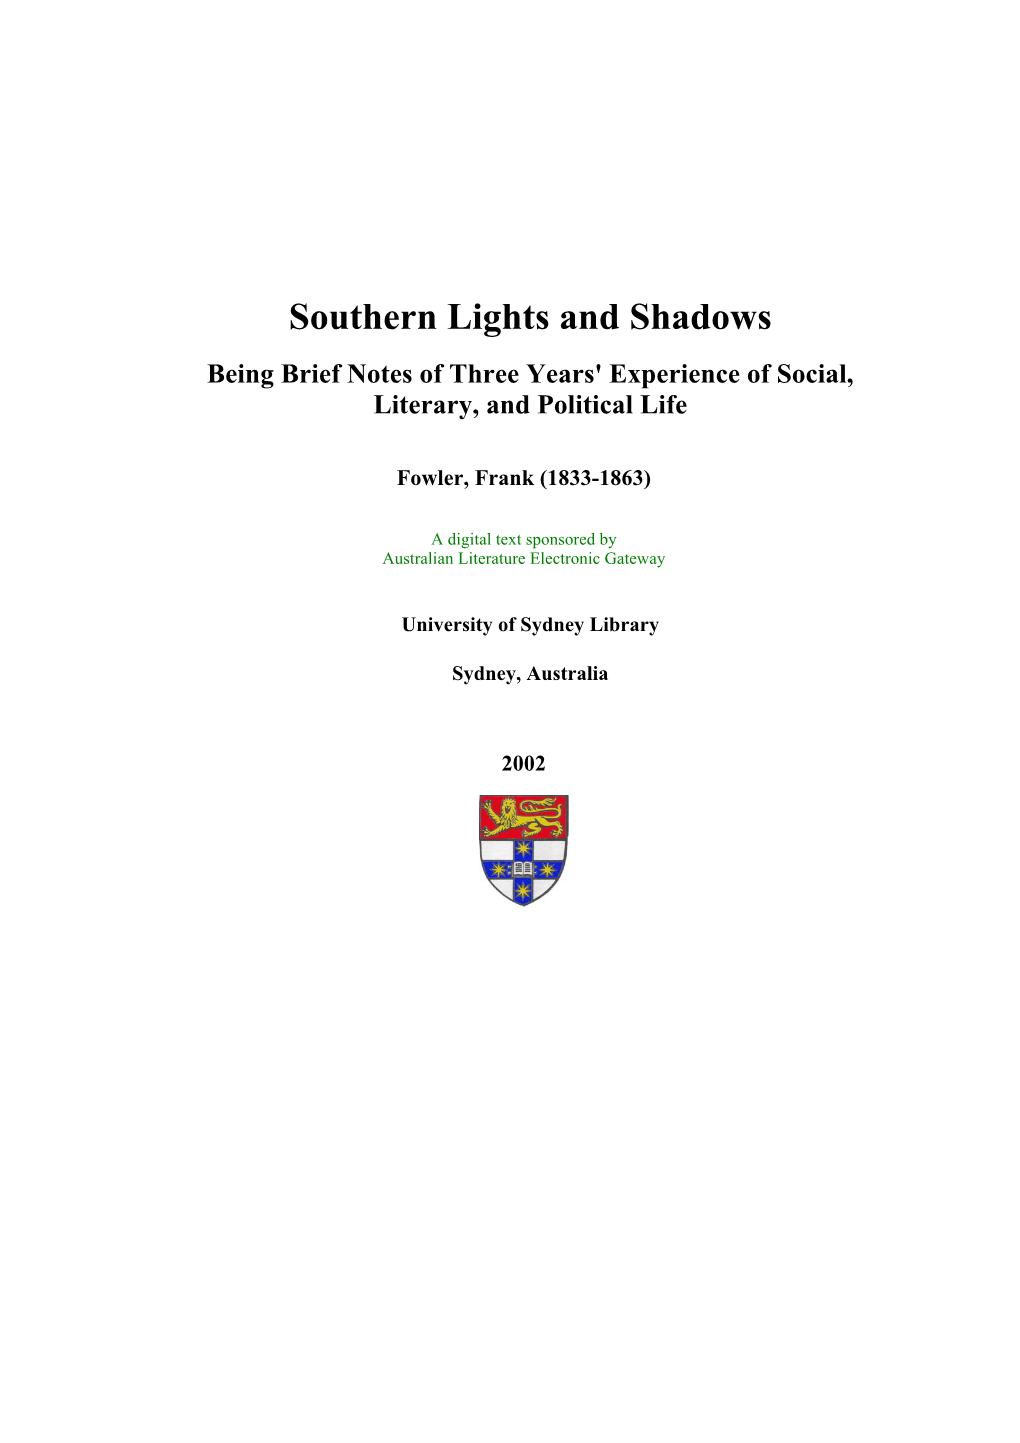 Southern Lights and Shadows Being Brief Notes of Three Years' Experience of Social, Literary, and Political Life